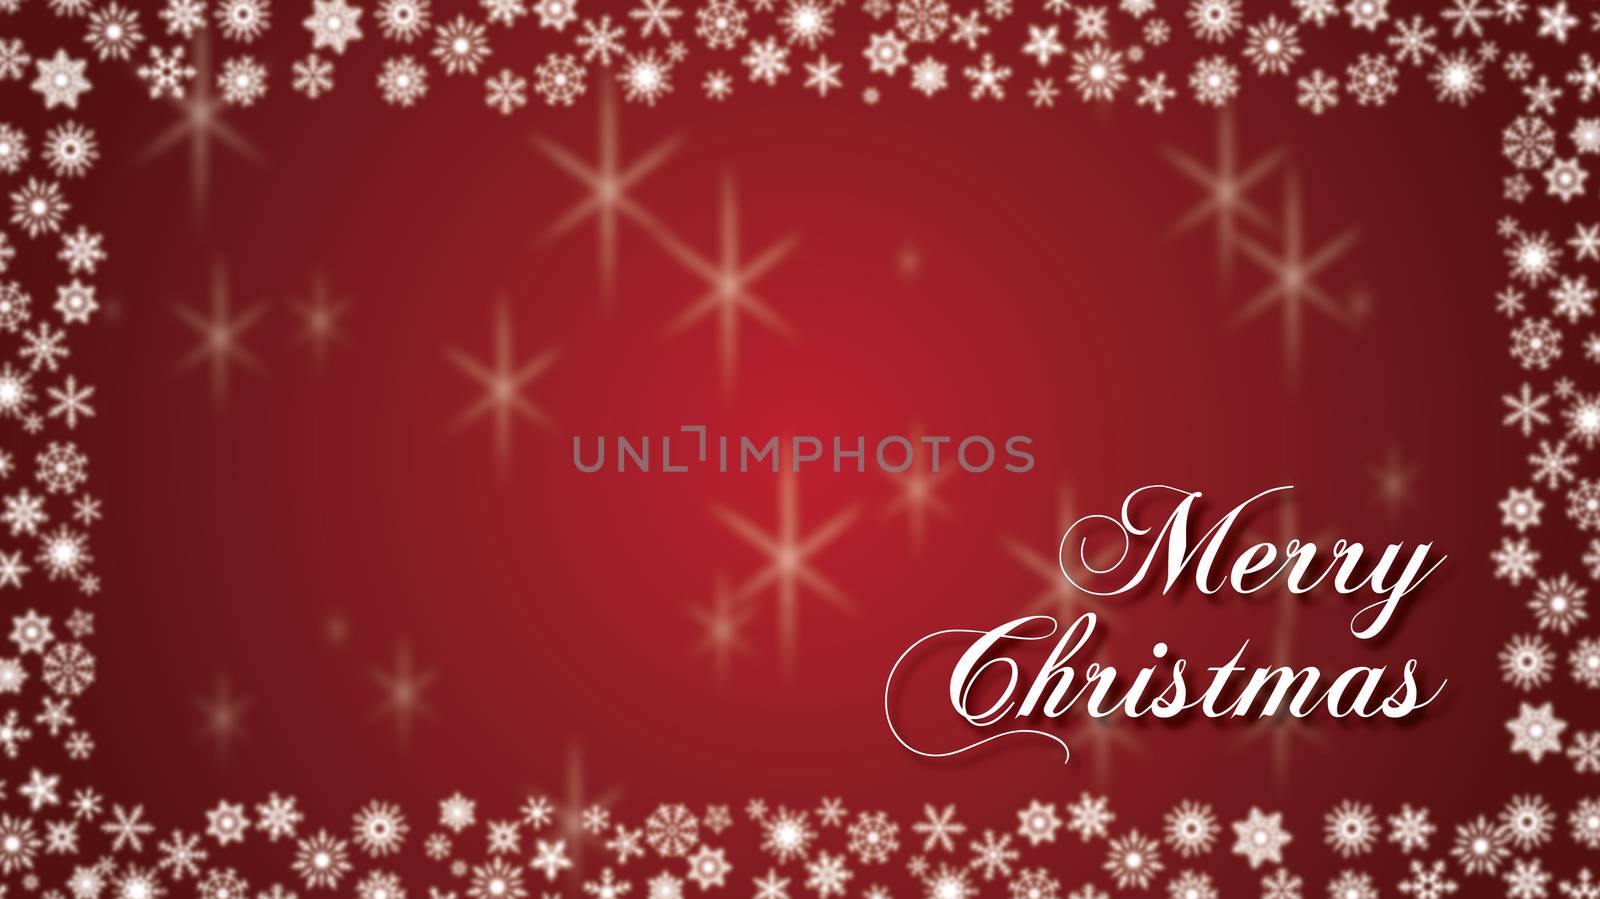 Merry Christmas Type with White snowflakes border and red background